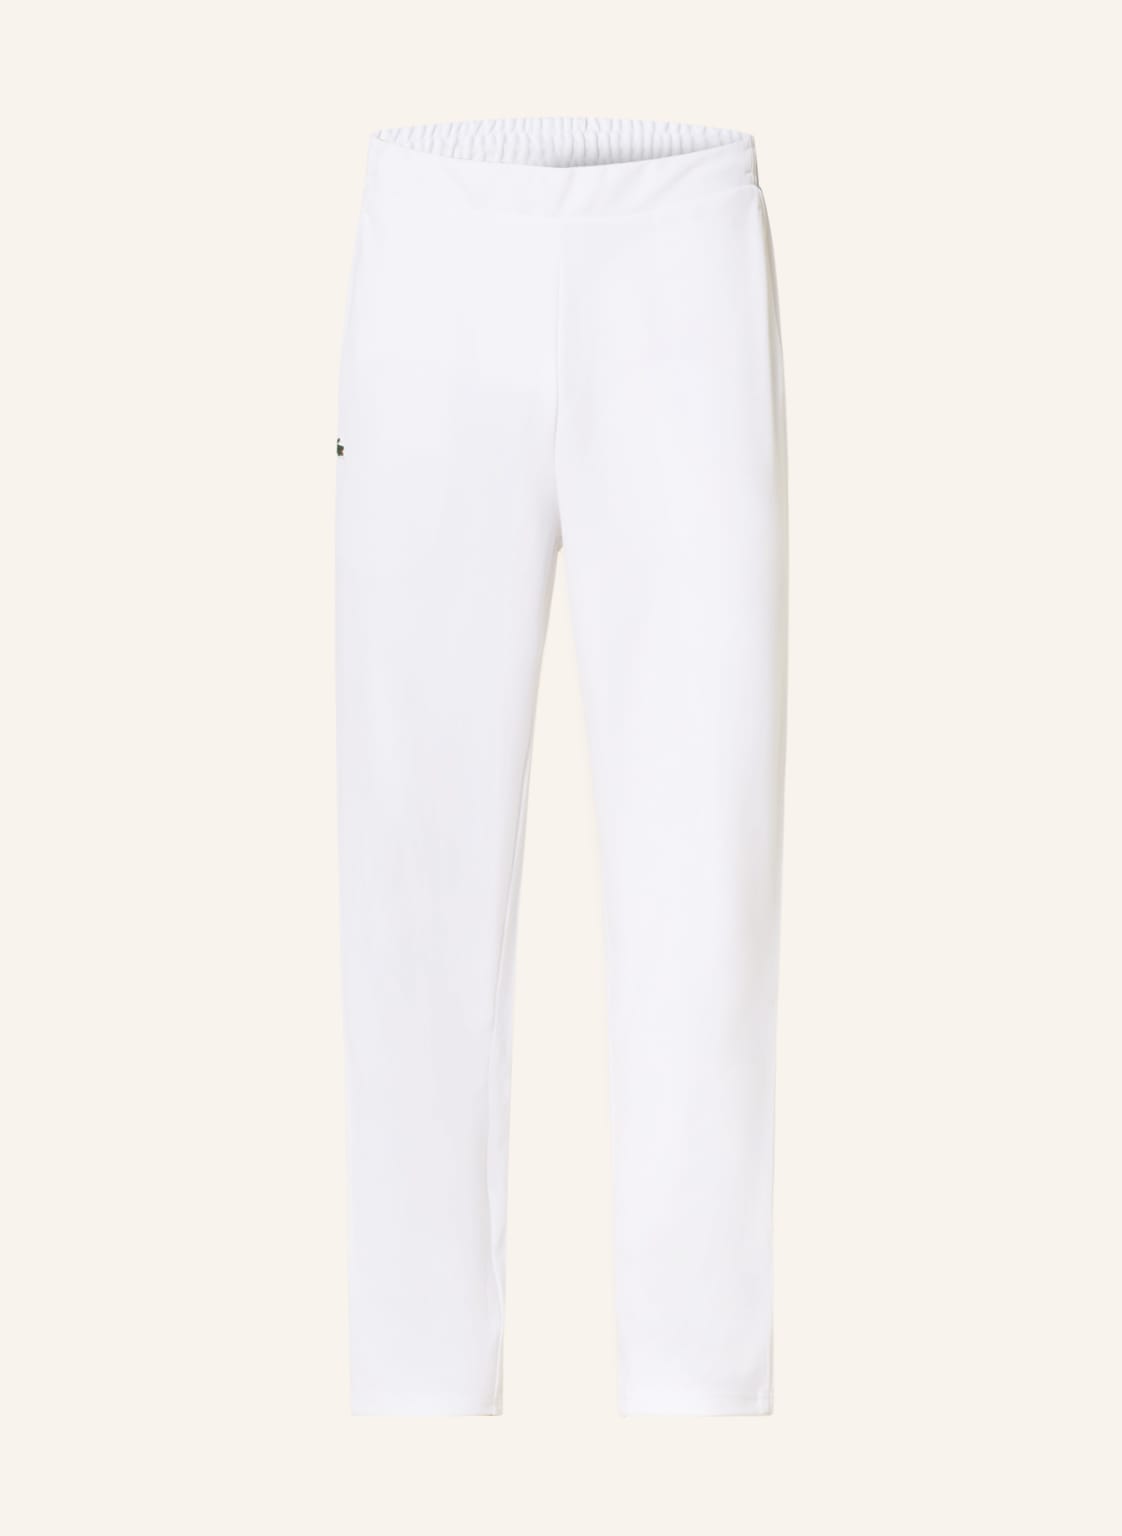 Lacoste Track Pants weiss von Lacoste